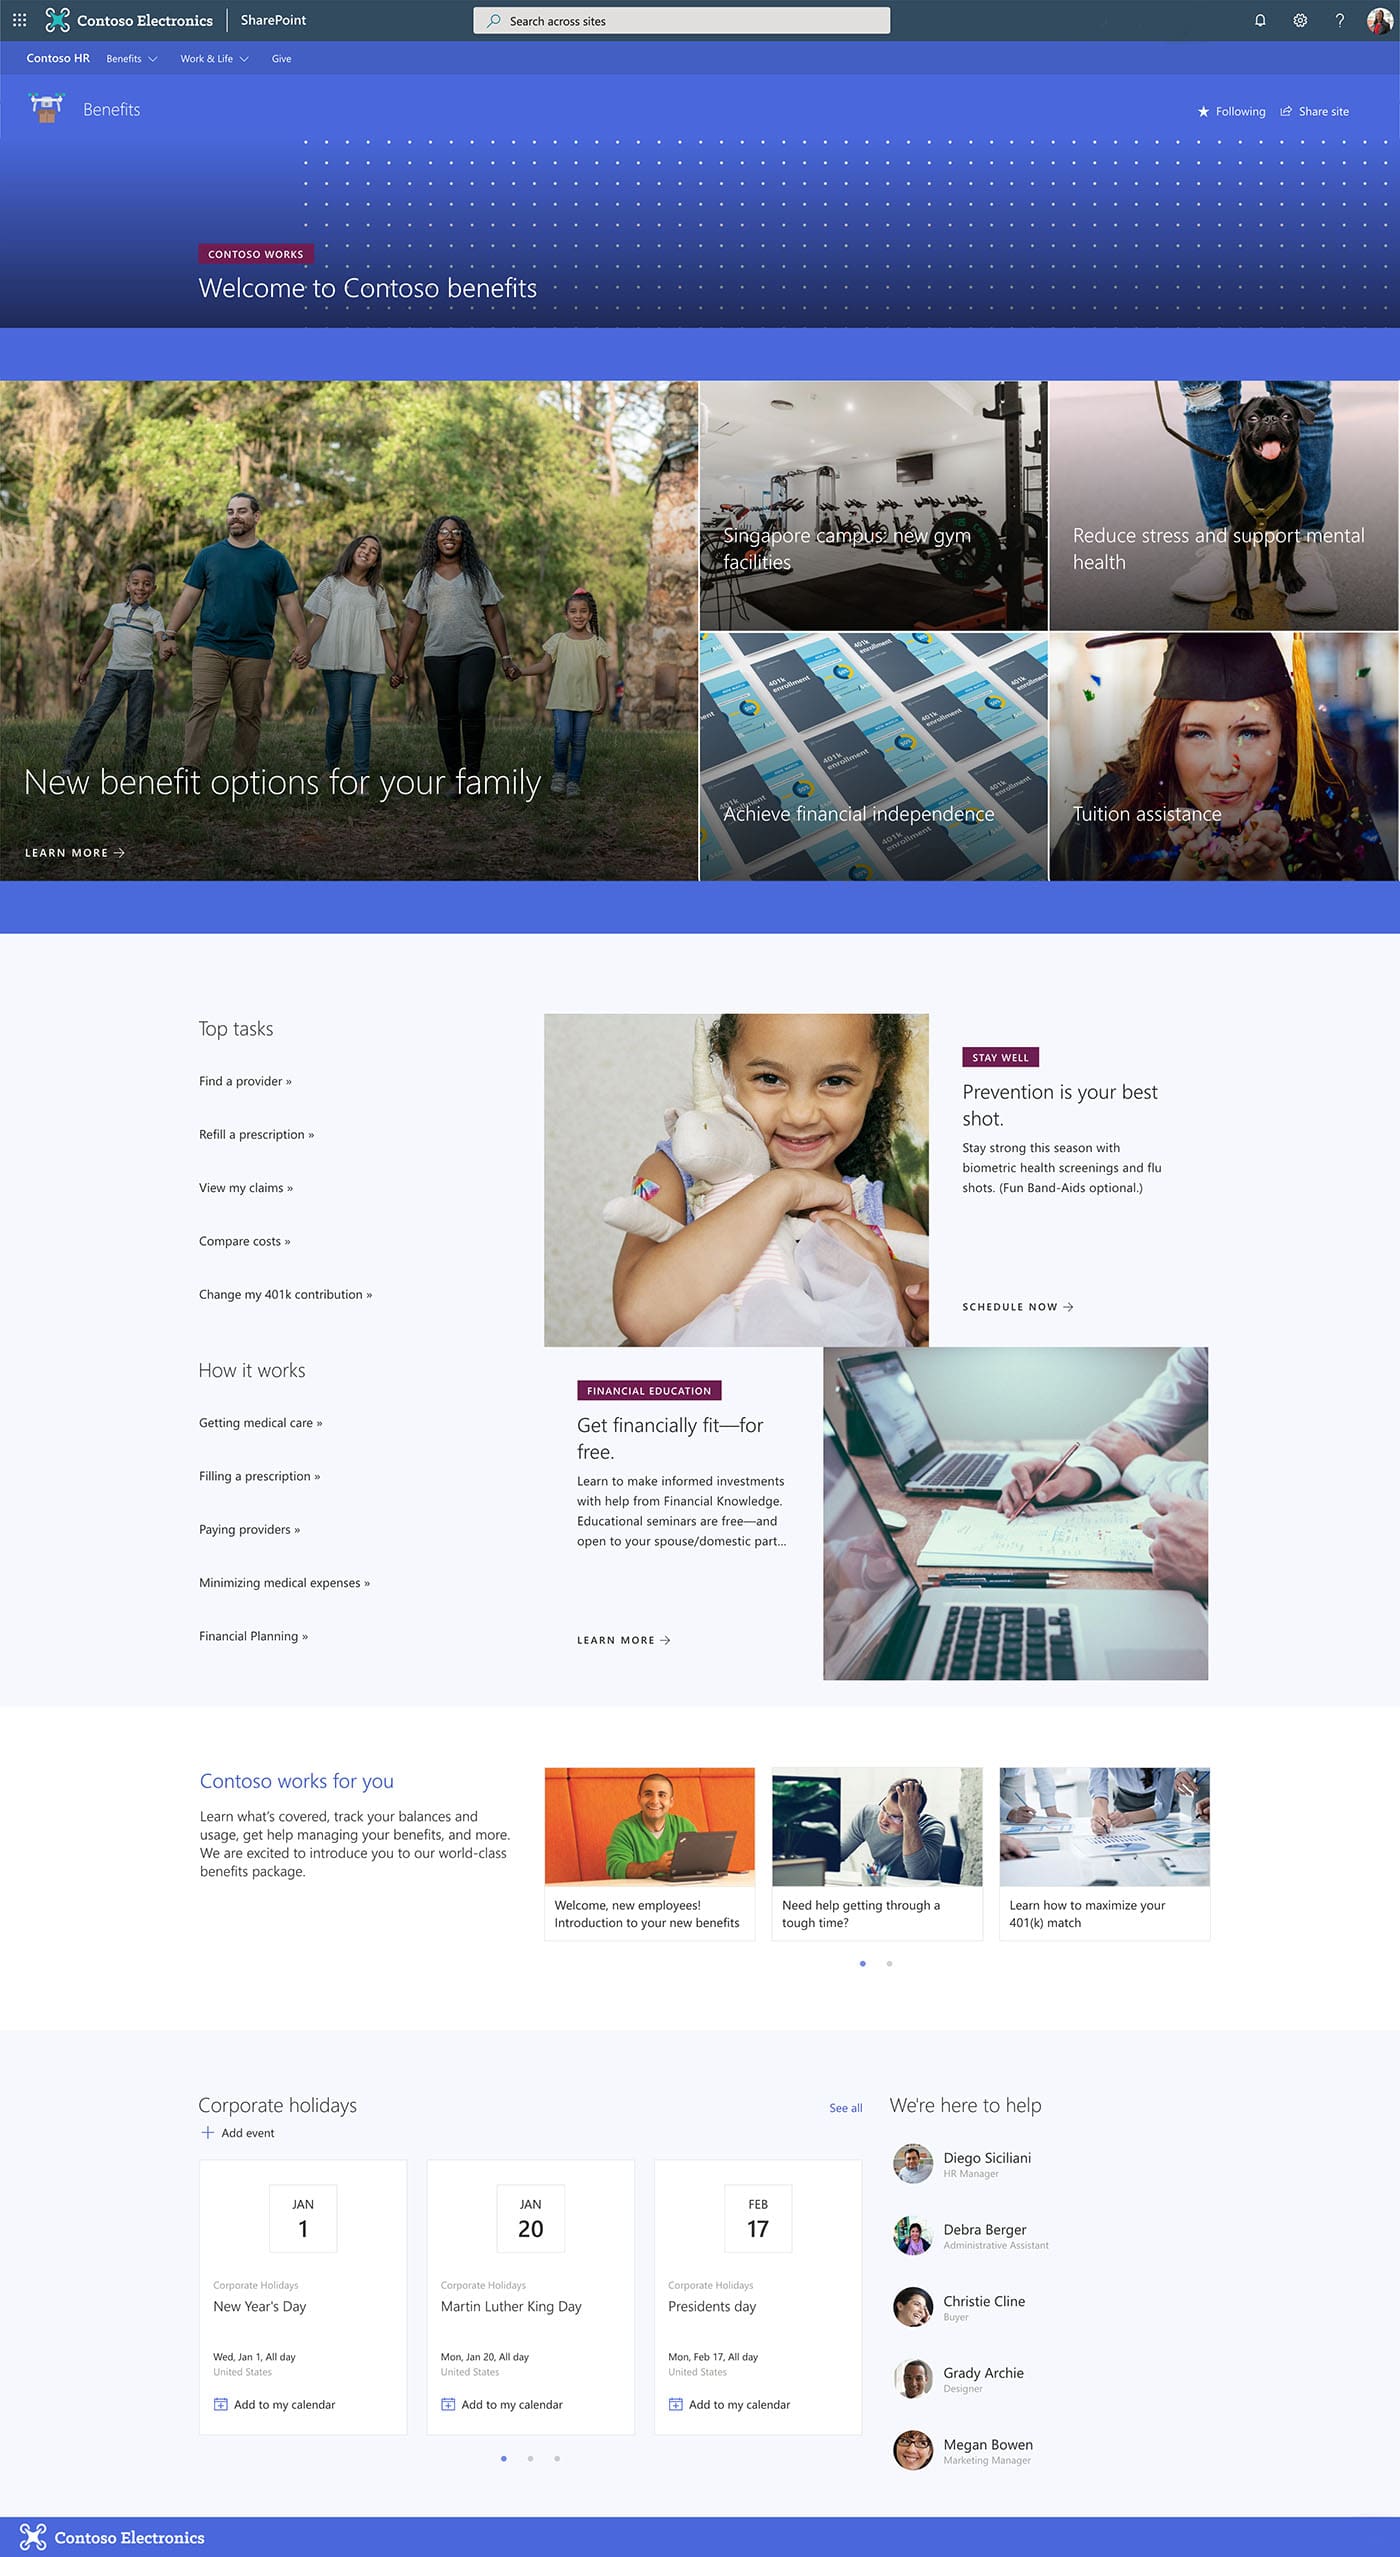 SharePoint Intranet Design Services - Human Resources